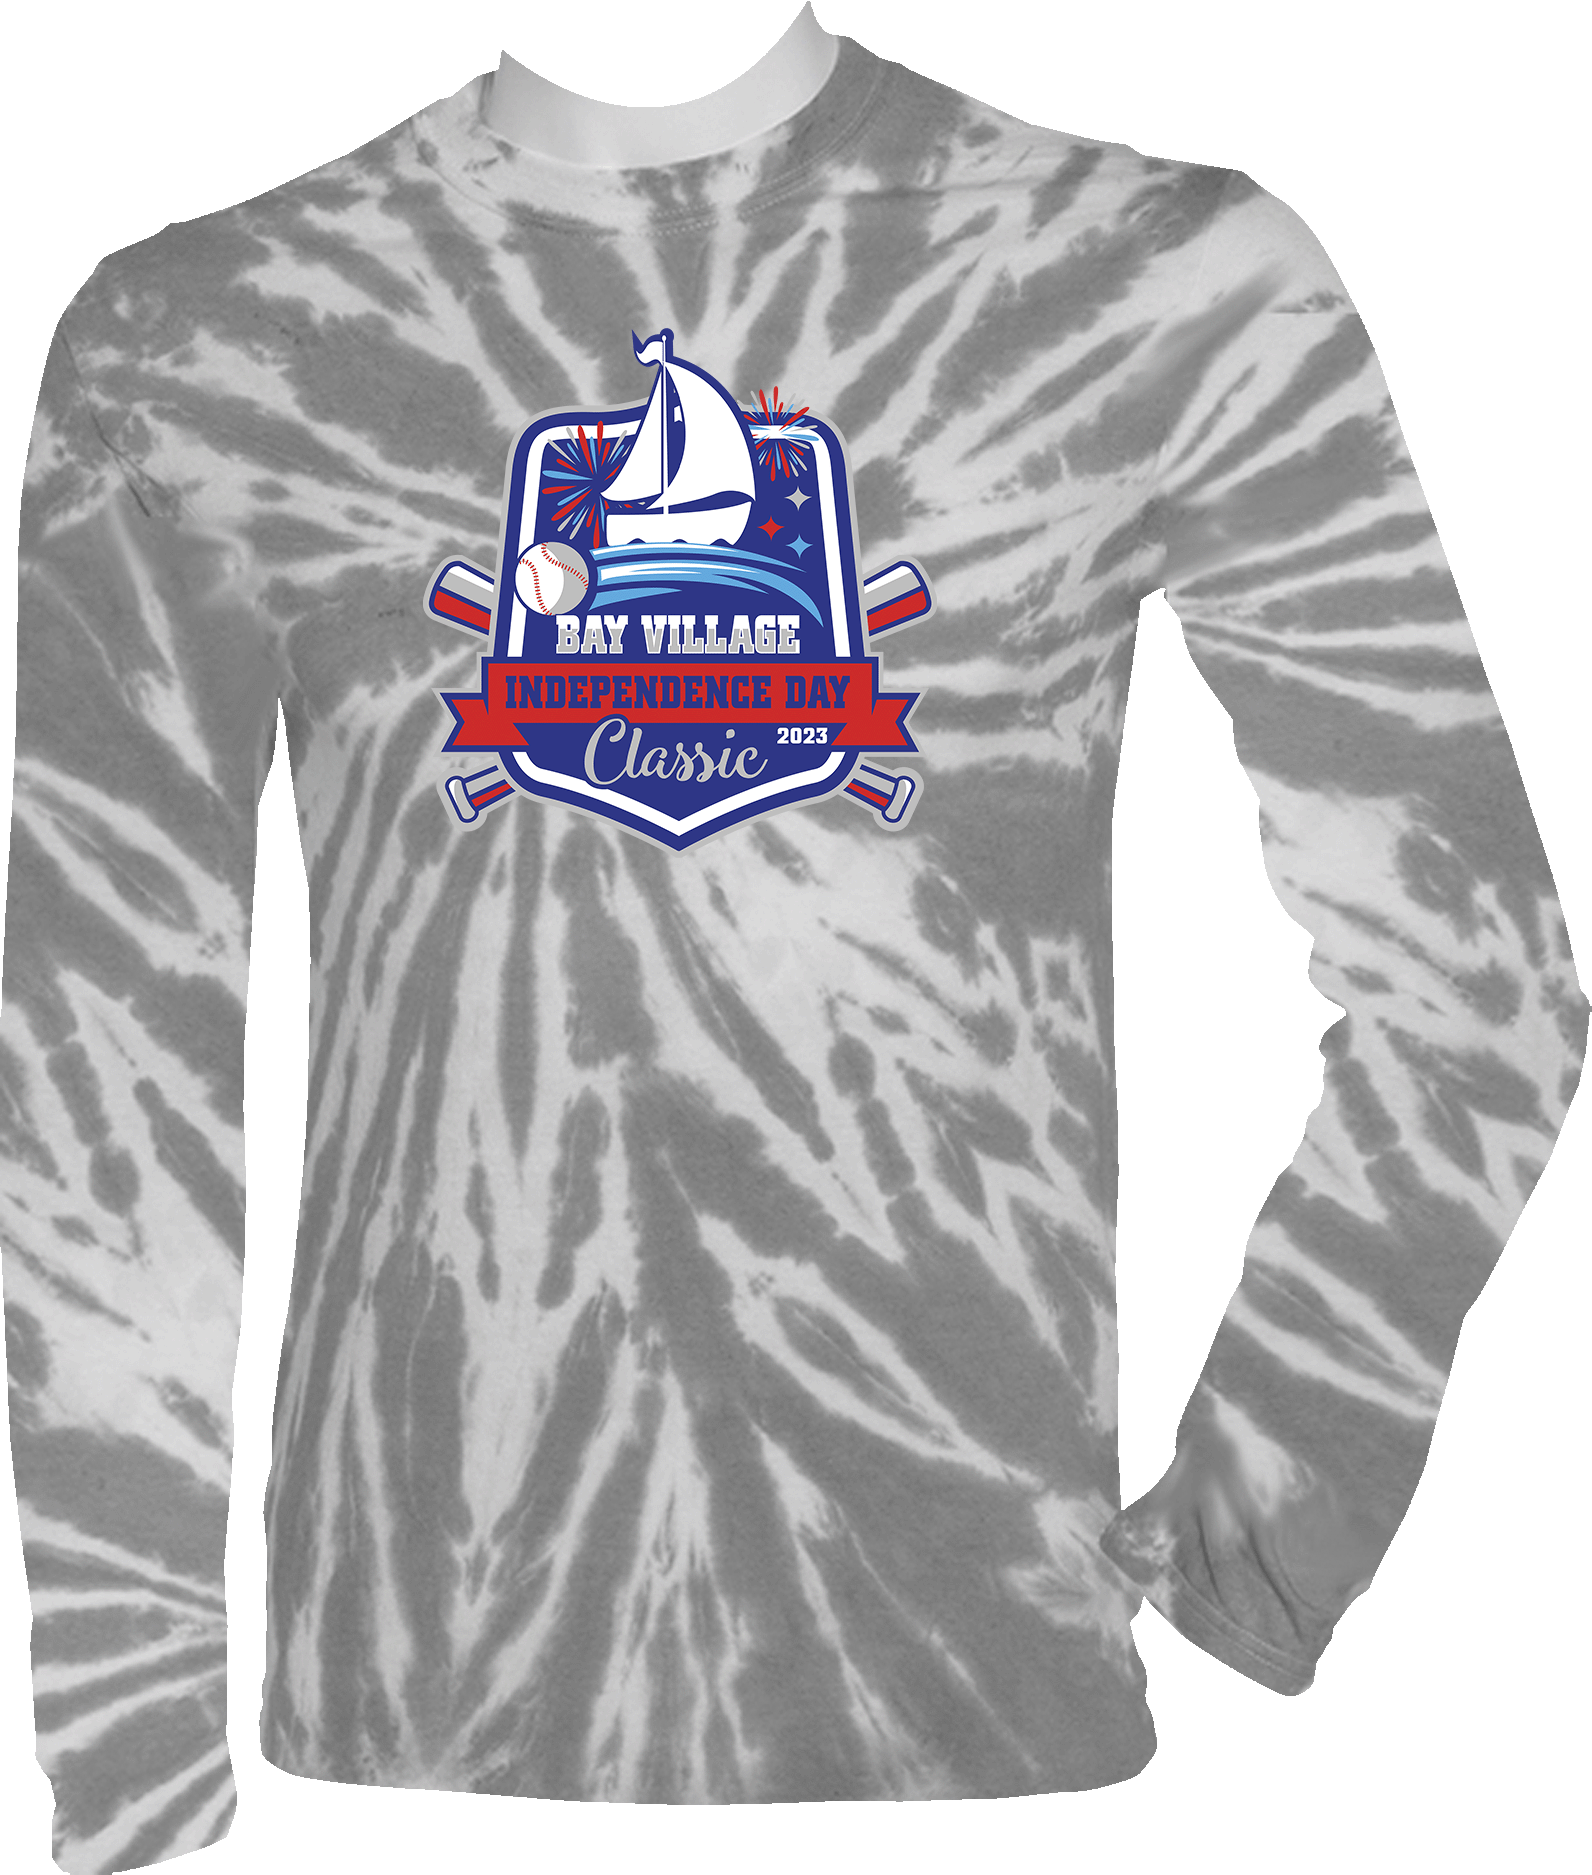 TIE-DYE LONG SLEEVES - 2023 Bay Village Independence Day Classic